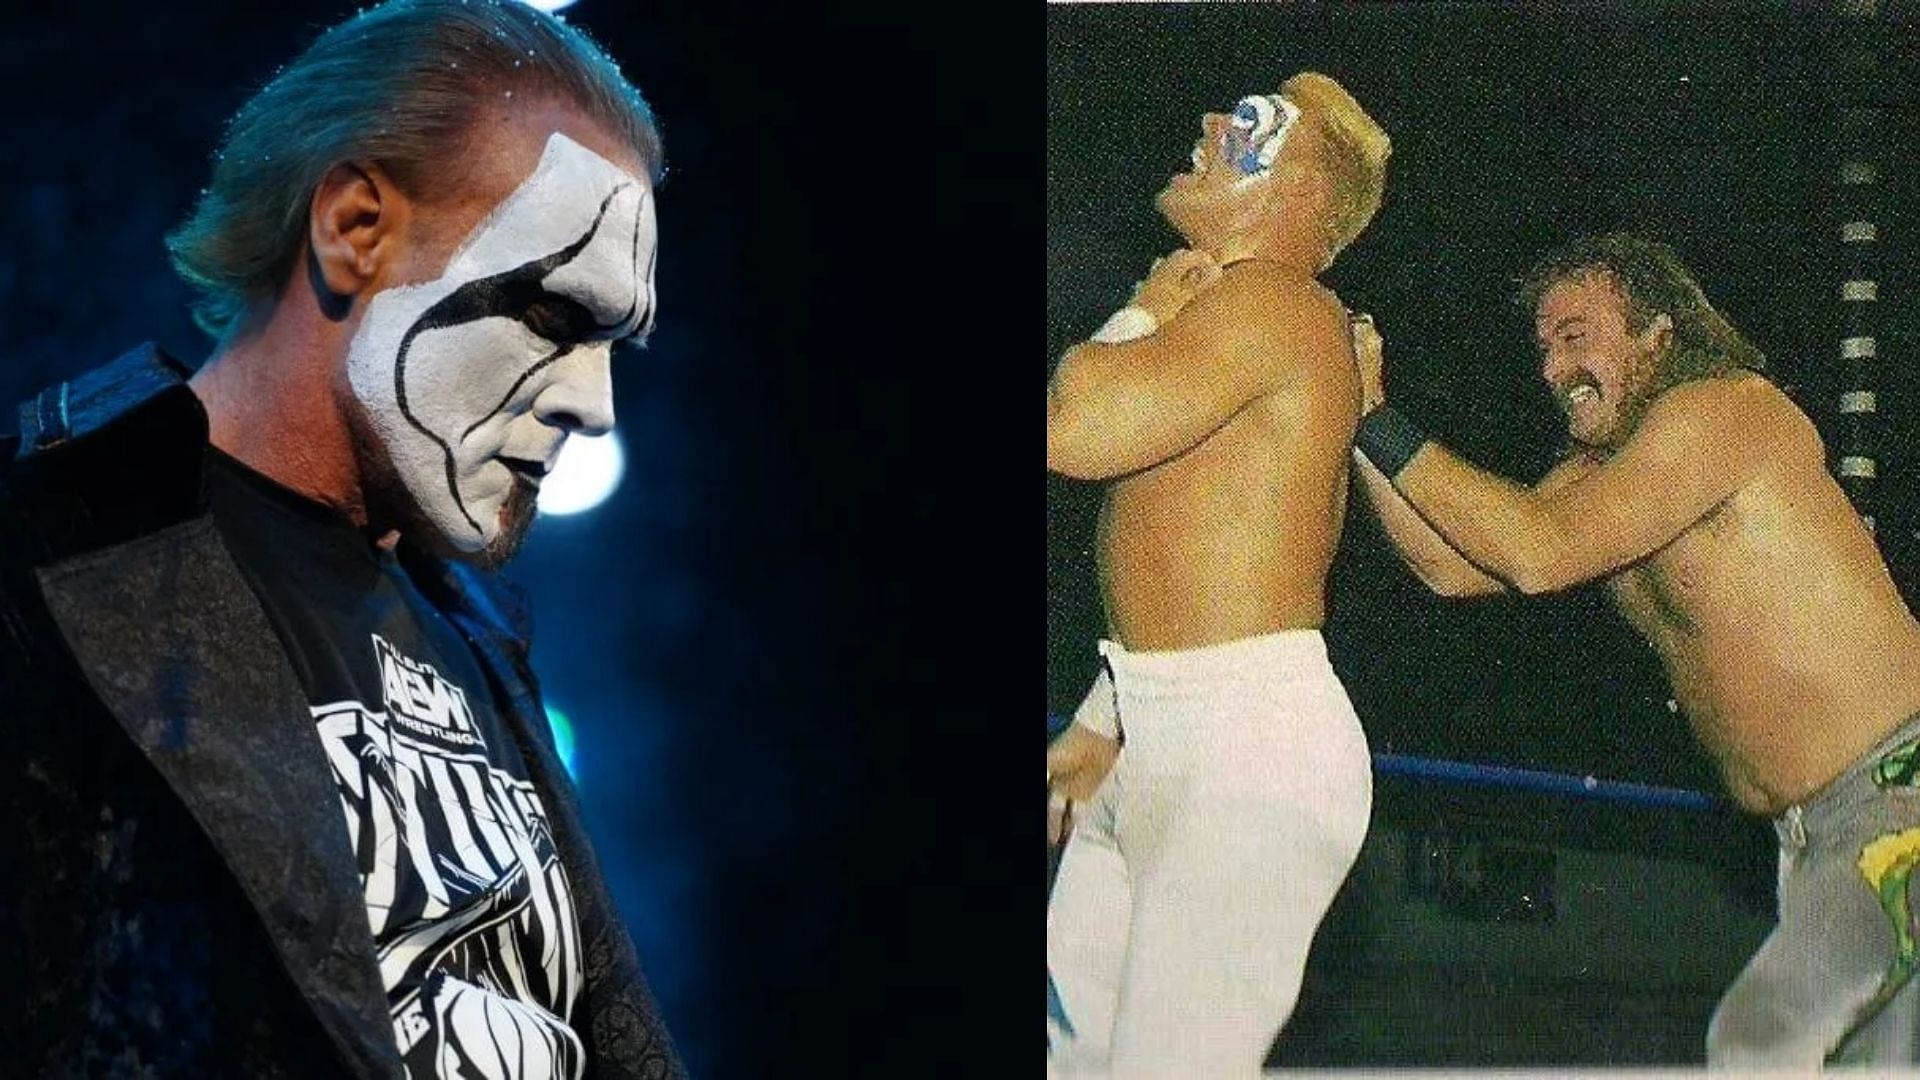 Jake Roberts recalls his infamous match with Sting from 30 years ago.